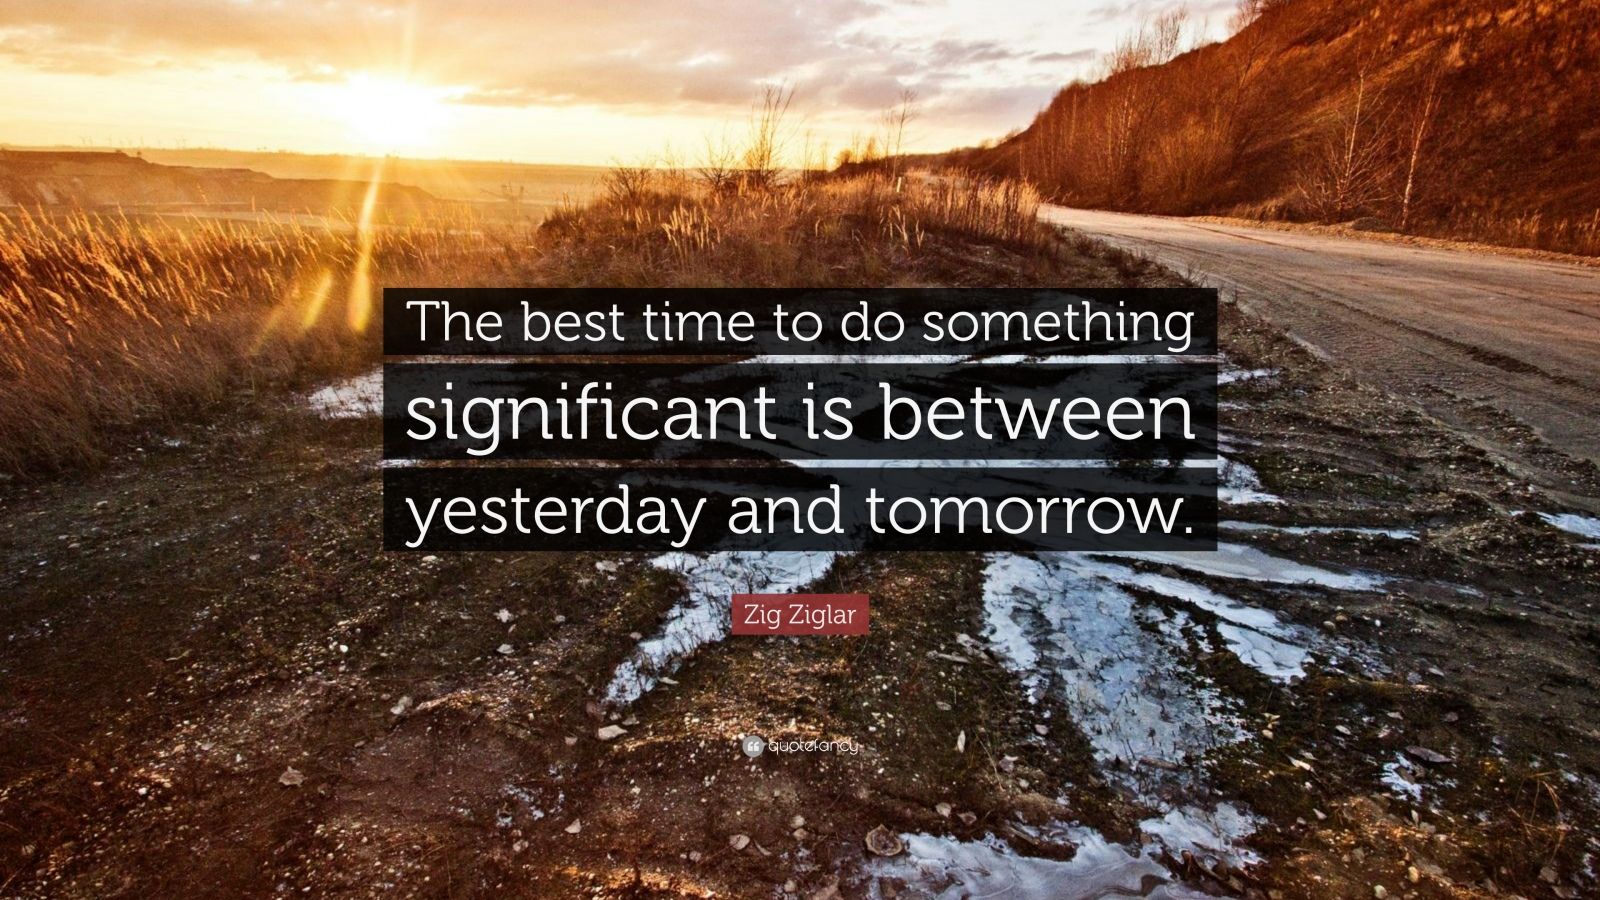 121721-Zig-Ziglar-Quote-The-best-time-to-do-something-significant-is.jpg